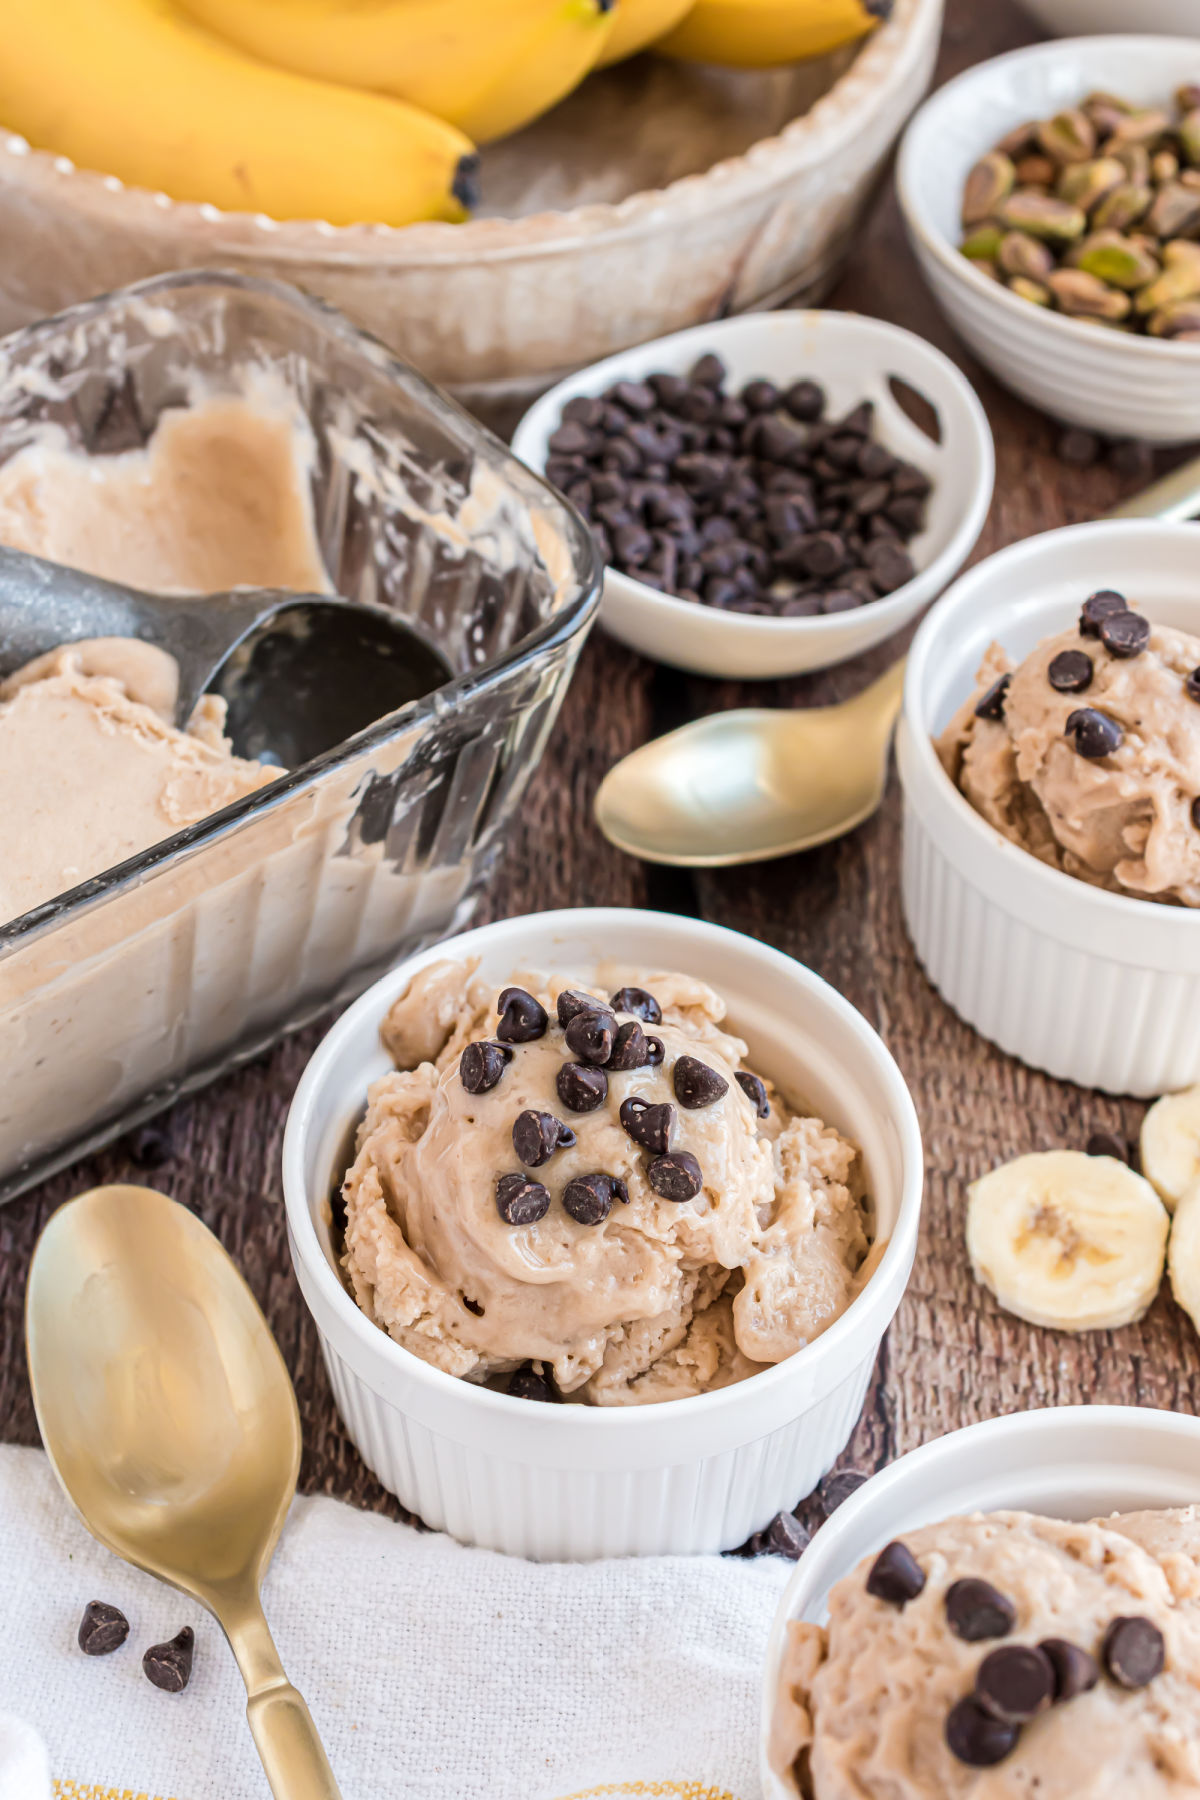 Chocolate chips on banana ice cream in a white bowl.